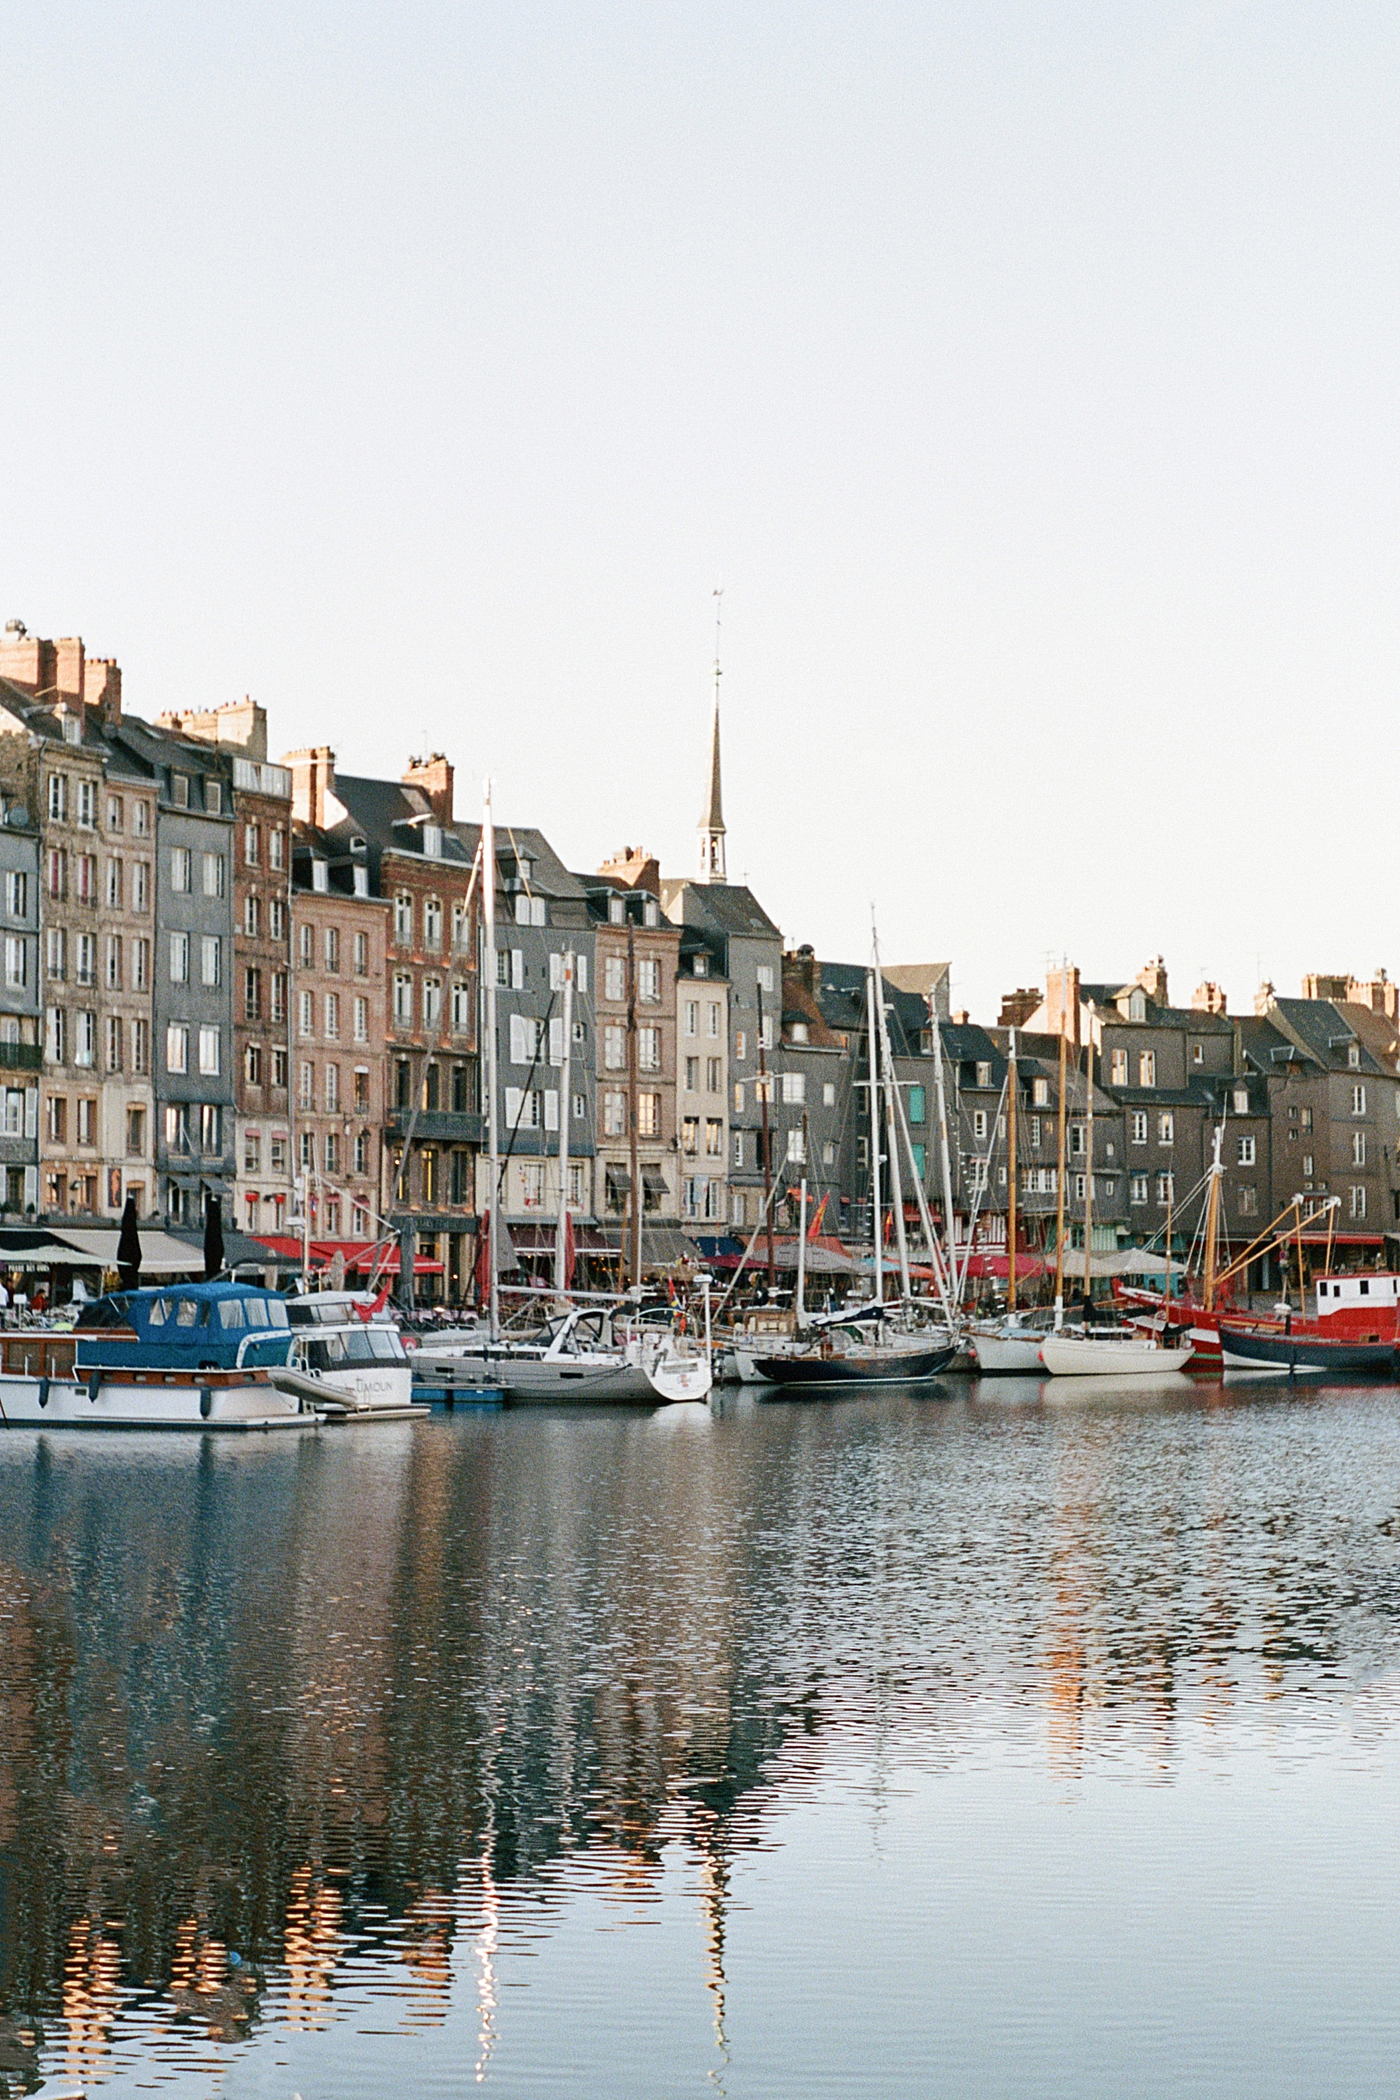 Tall, multistory homes and docked sailboats on the opposite side of a French canal | Image by Hope Helmuth Photography